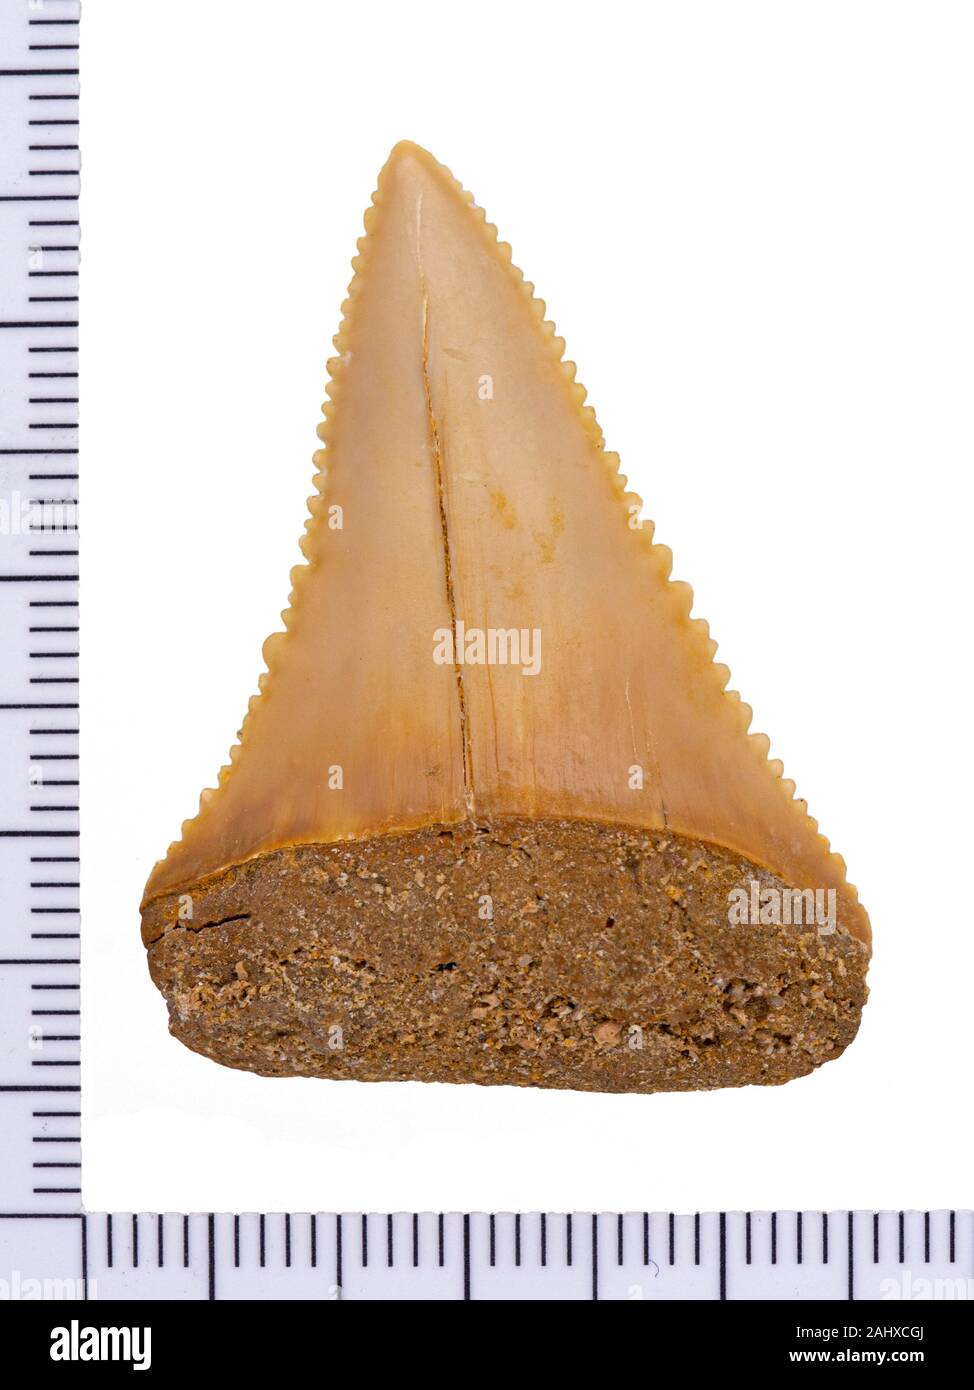 https://c8.alamy.com/comp/2AHXCGJ/fossil-great-white-shark-tooth-carcharodon-carcharias-lingual-surface-inner-side-isolated-great-white-sharks-evolved-approximately-16-million-ye-2AHXCGJ.jpg